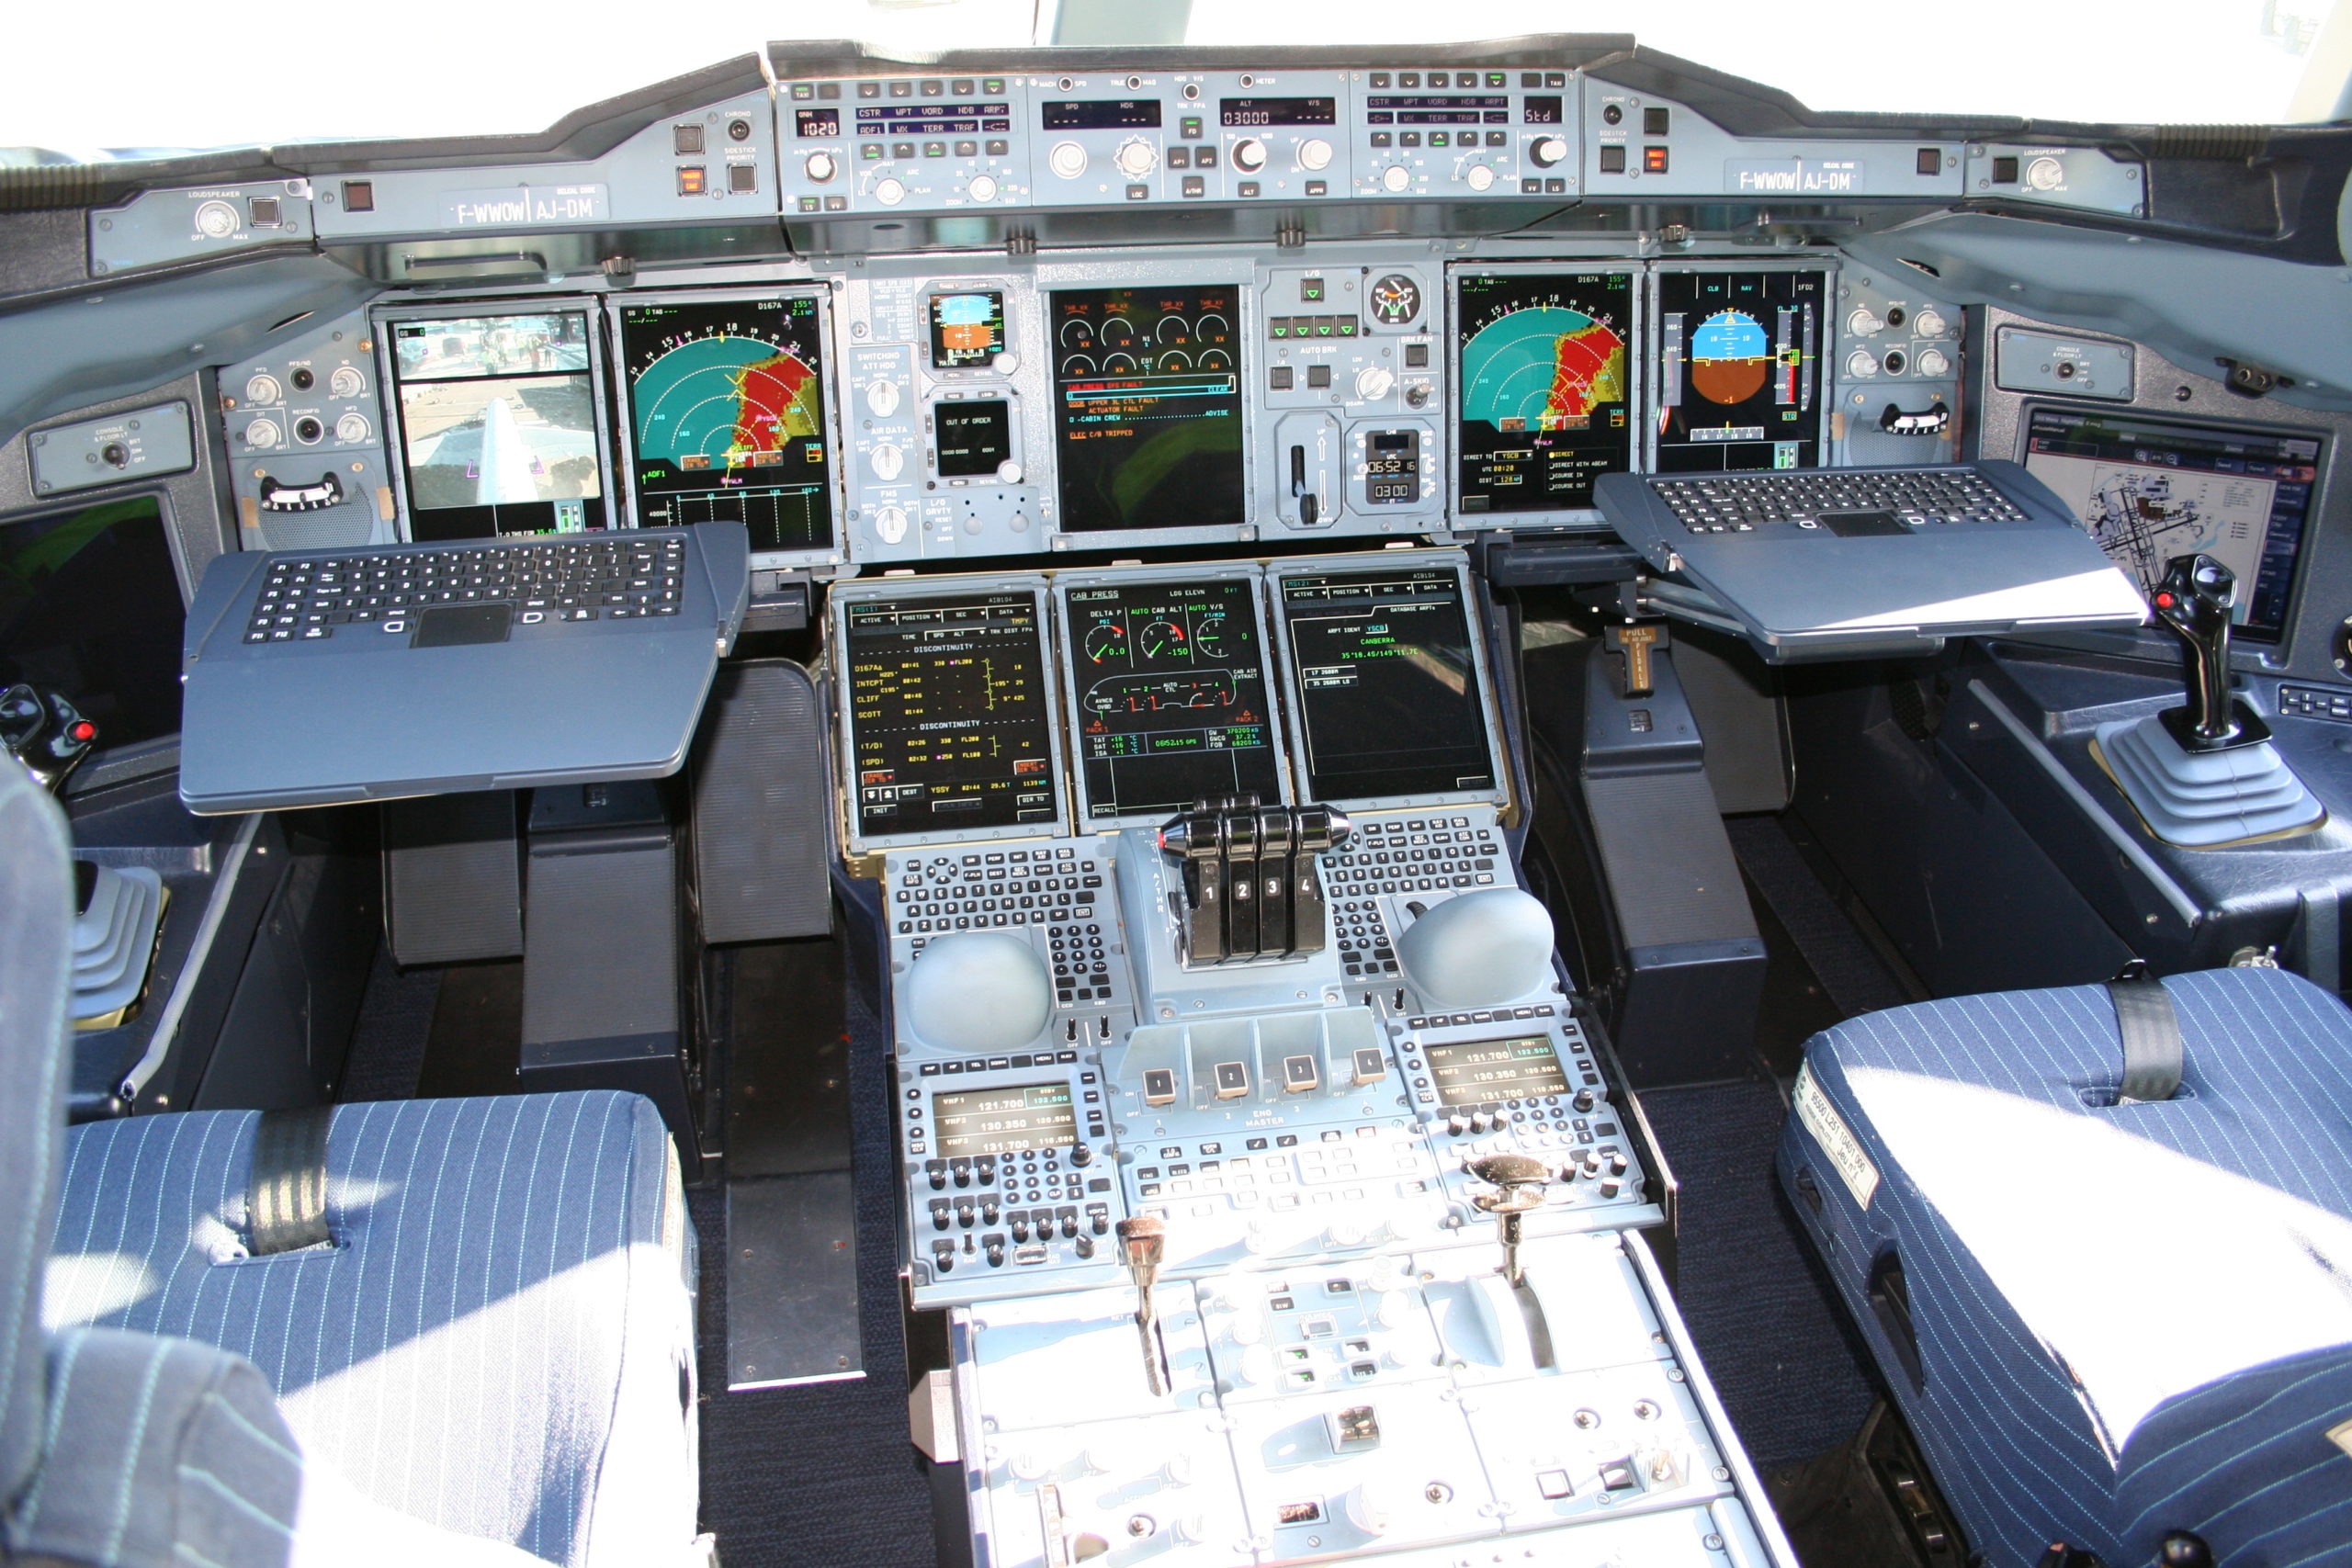 Ten years ago, this cockpit looked futuristic. Will it soon be retro? Photo: Naddsy/Wikimedia